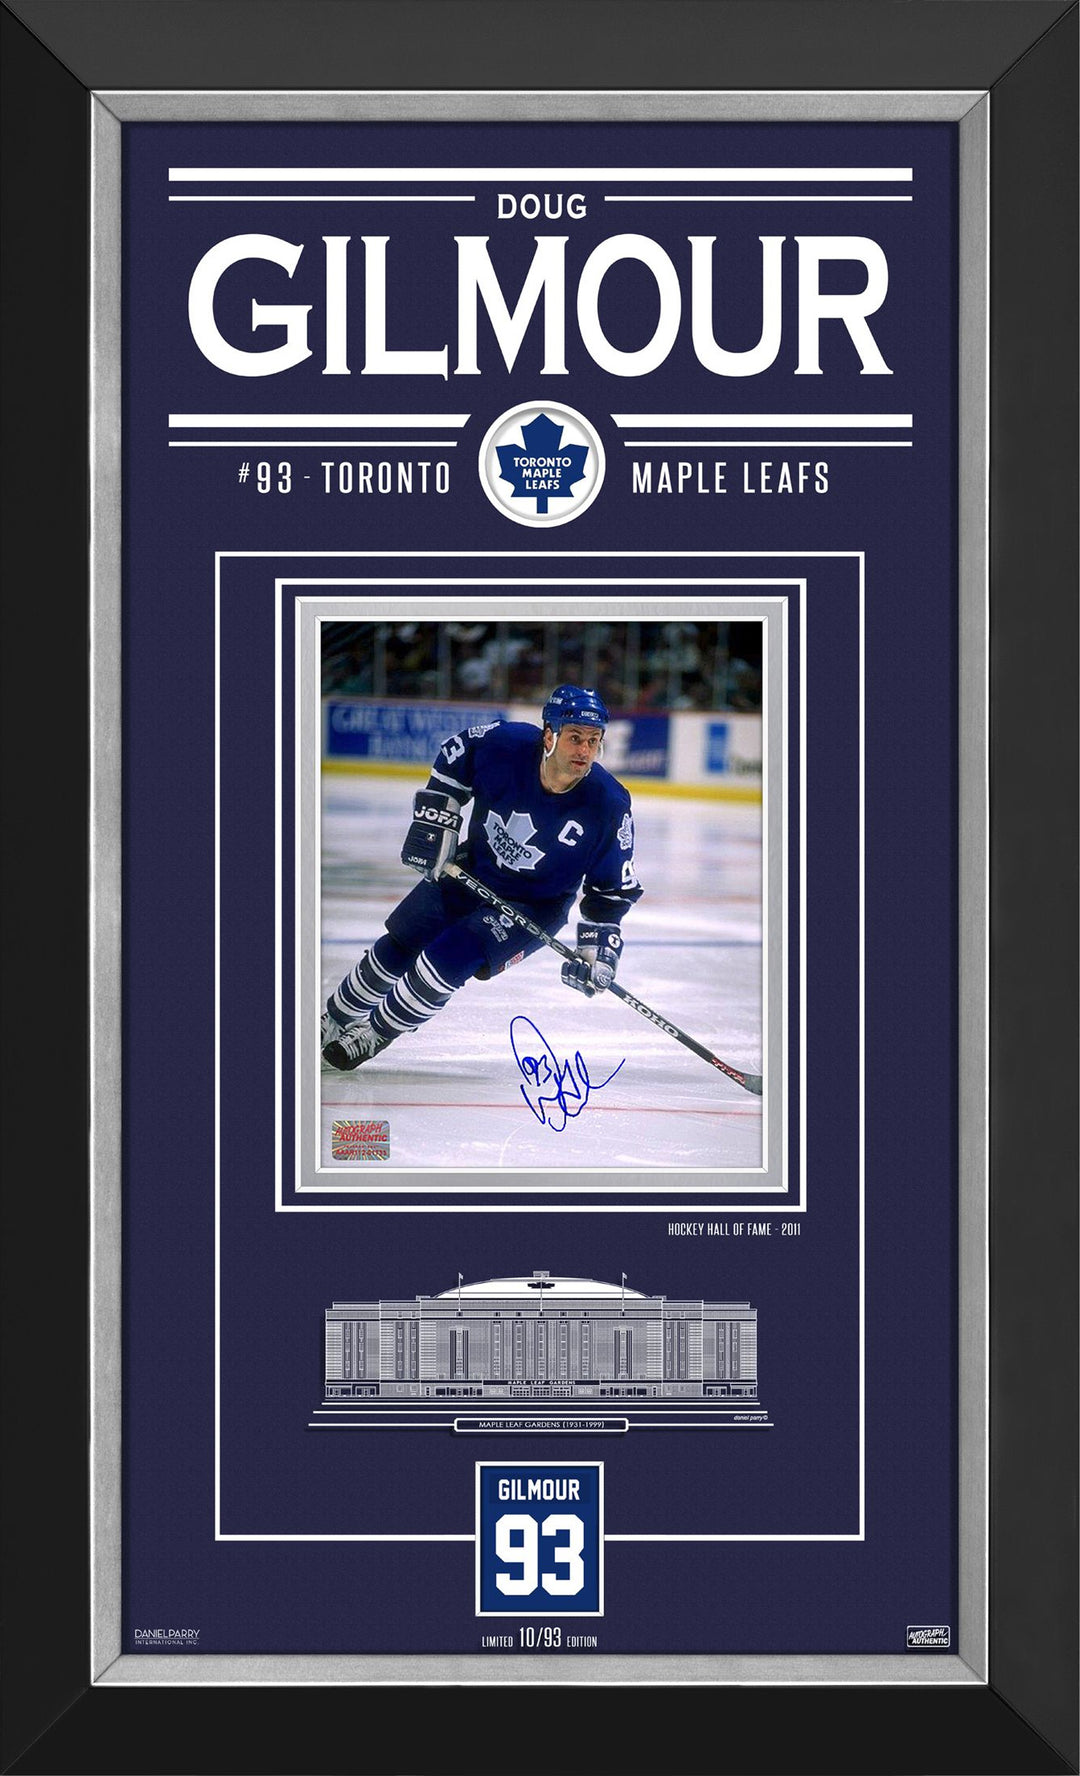 Doug Gilmour Signed Photo Limited Edition Of 93 Frame Toronto Maple Leafs, Toronto Maple Leafs, NHL, Hockey, Autographed, Signed, AACMH33055